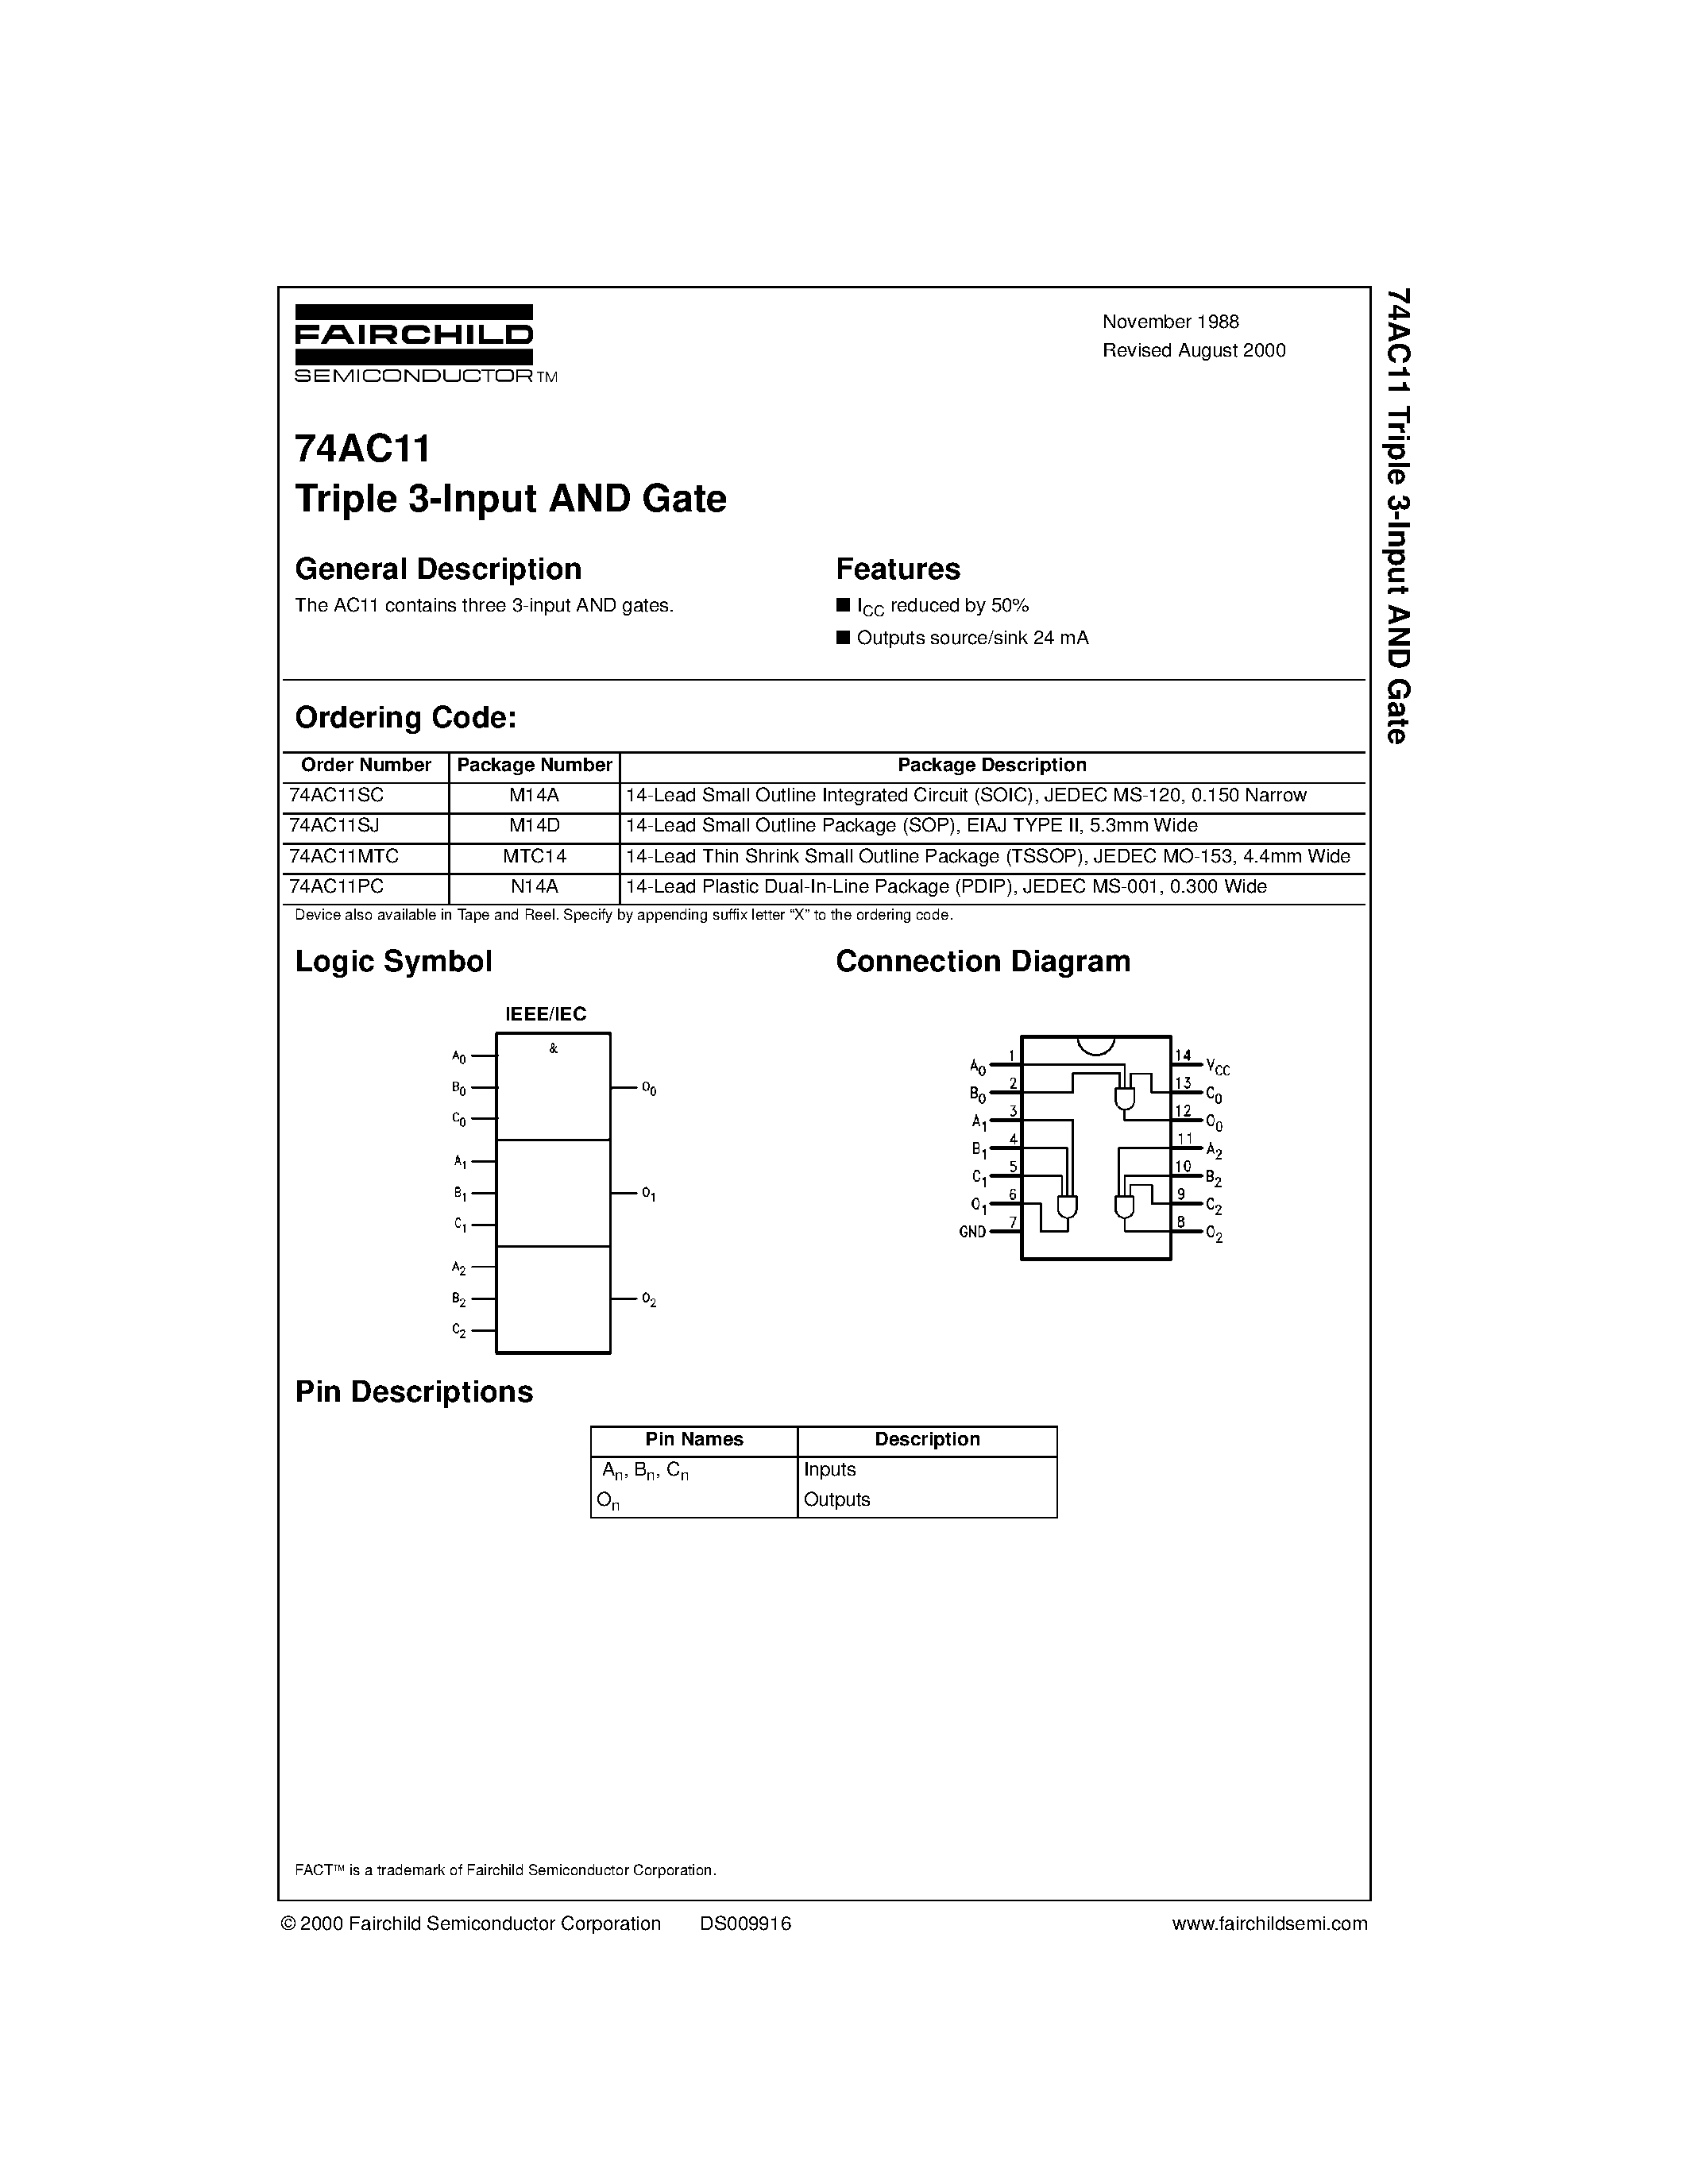 Datasheet 74AC11SC - Triple 3-Input AND Gate page 1